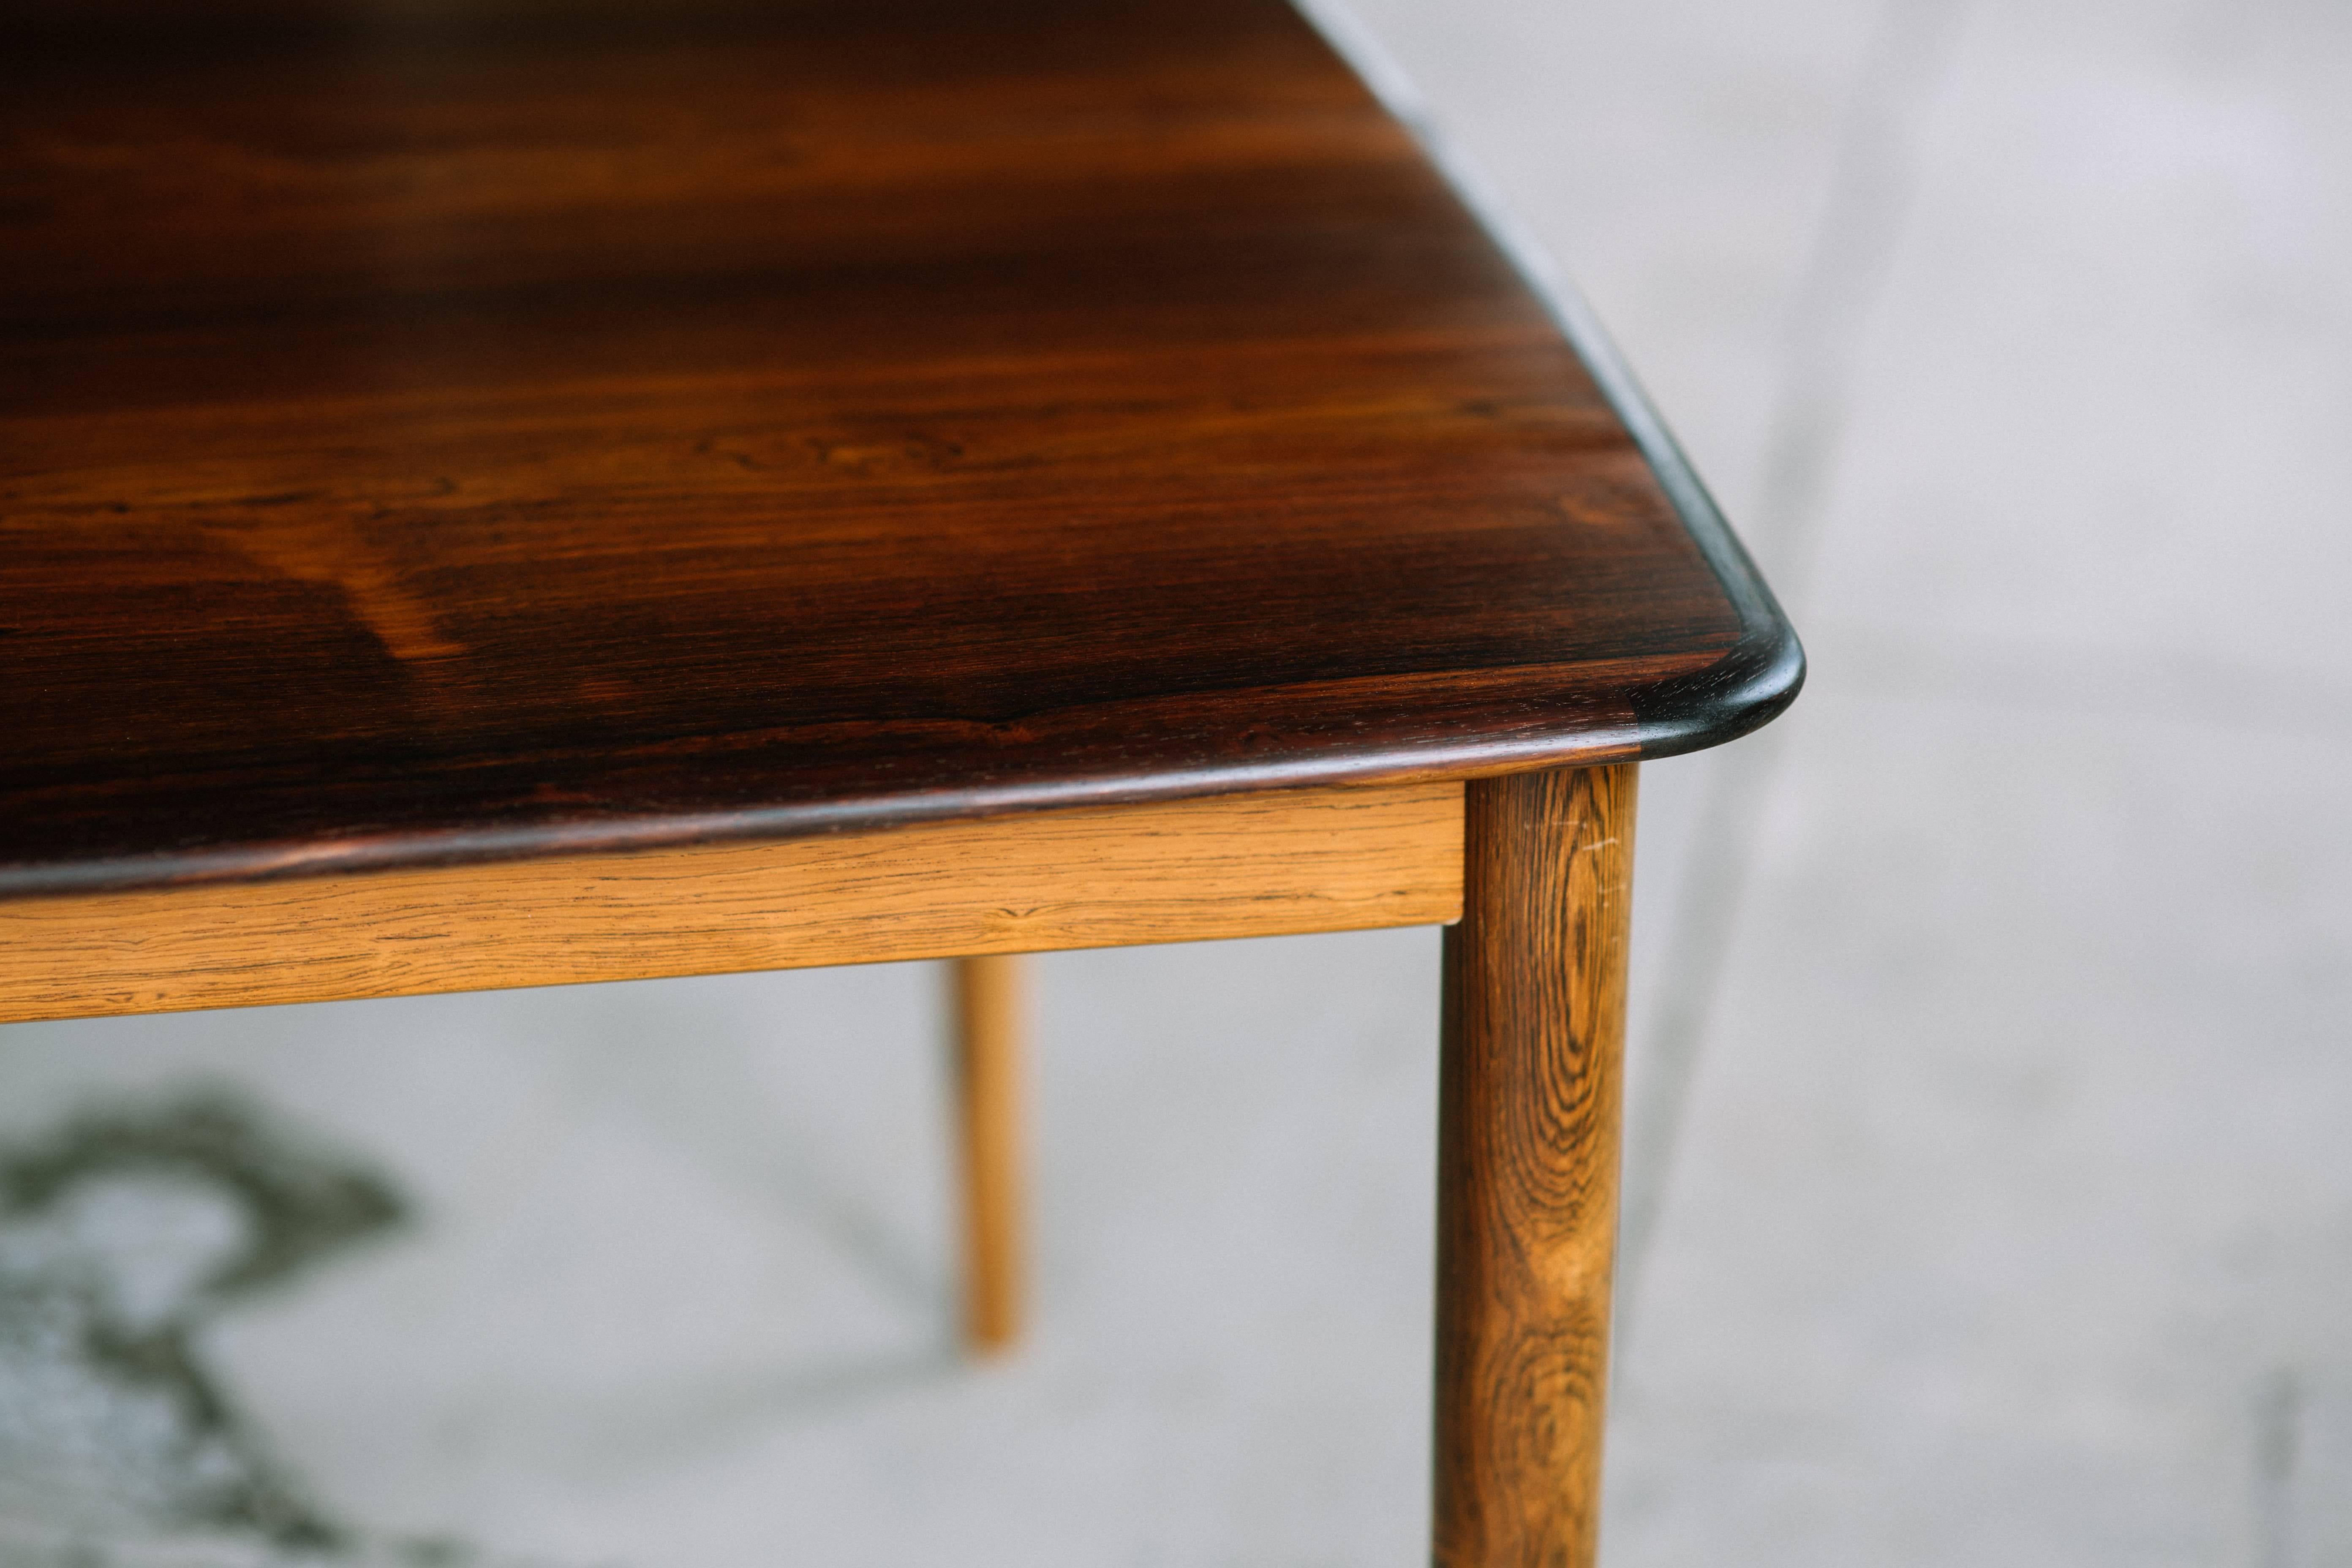 Gorgeous and unique square dining table commissioned by Illums Bolighus. This rosewood table has been fully professionally restored and is in perfect condition. The legs / base of the table are slightly lighter than the top of the table. The leaves